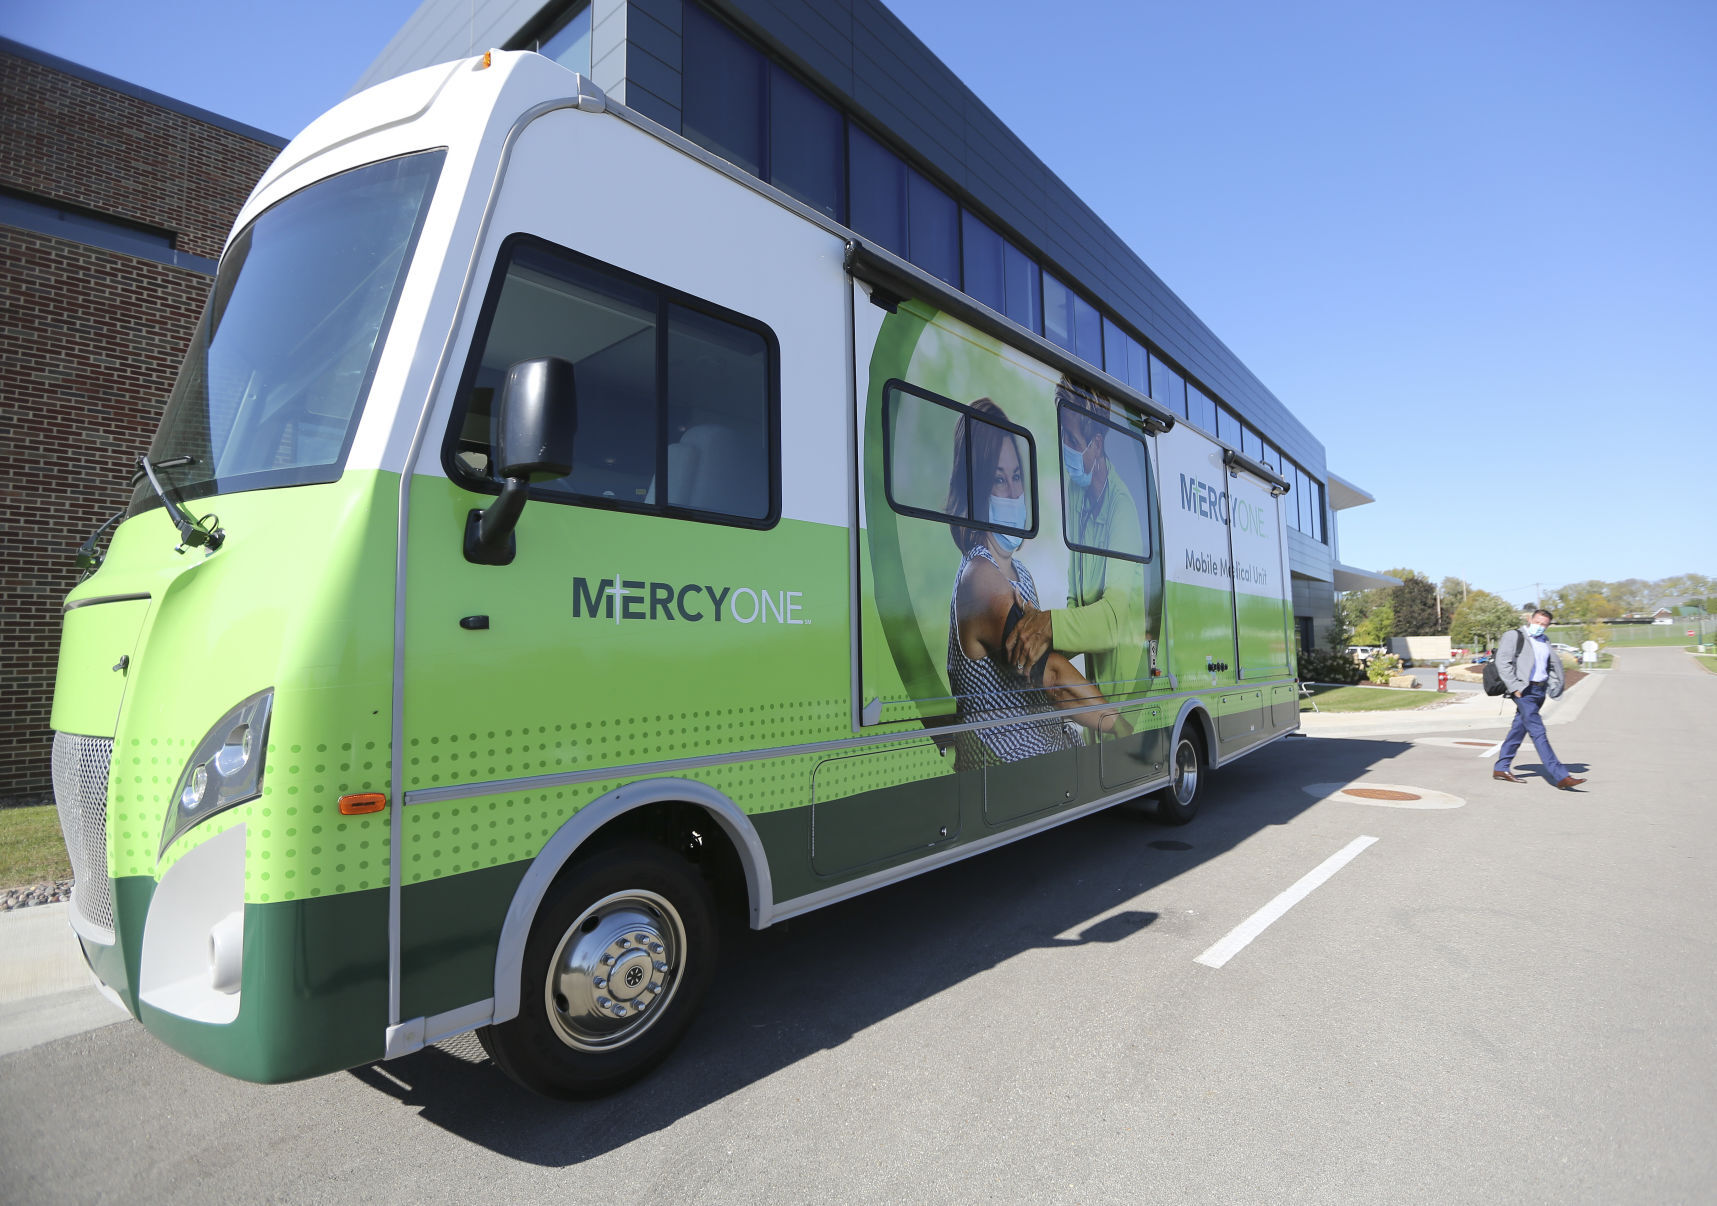 The new MercyOne mobile medical unit sits outside the MercyOne Dubuque Cancer Center on Tuesday.    PHOTO CREDIT: Dave Kettering